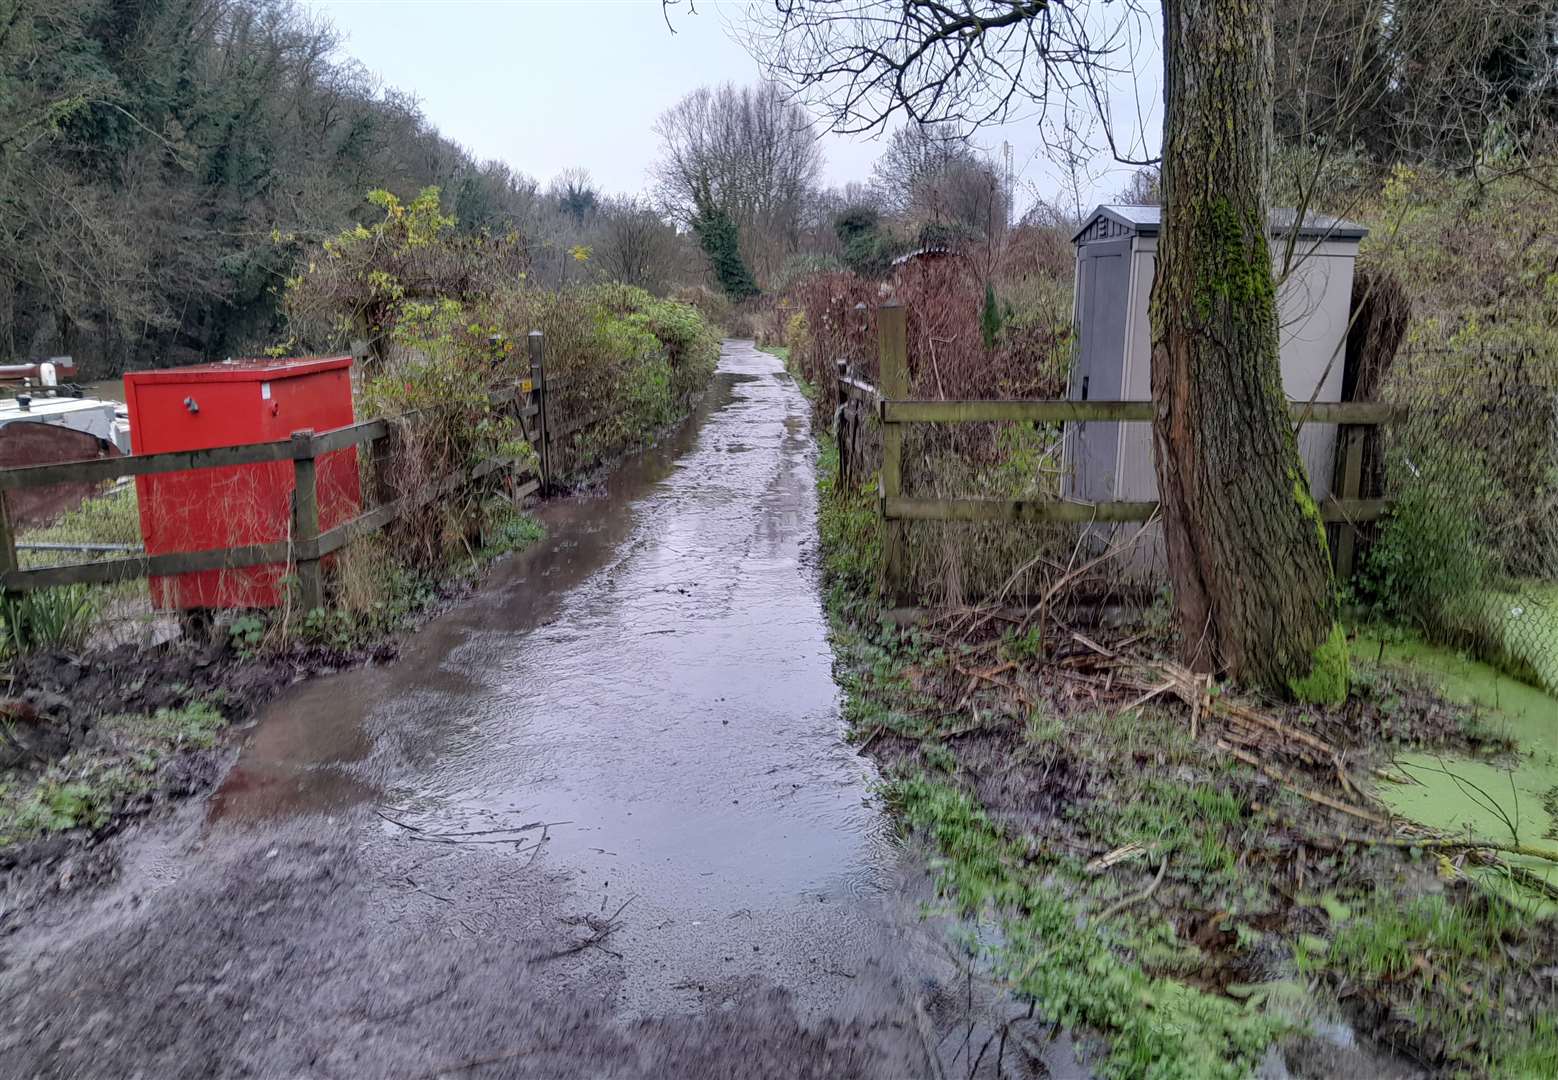 Could the towpath by the River Medway provide an opportunity for nature enhancement?